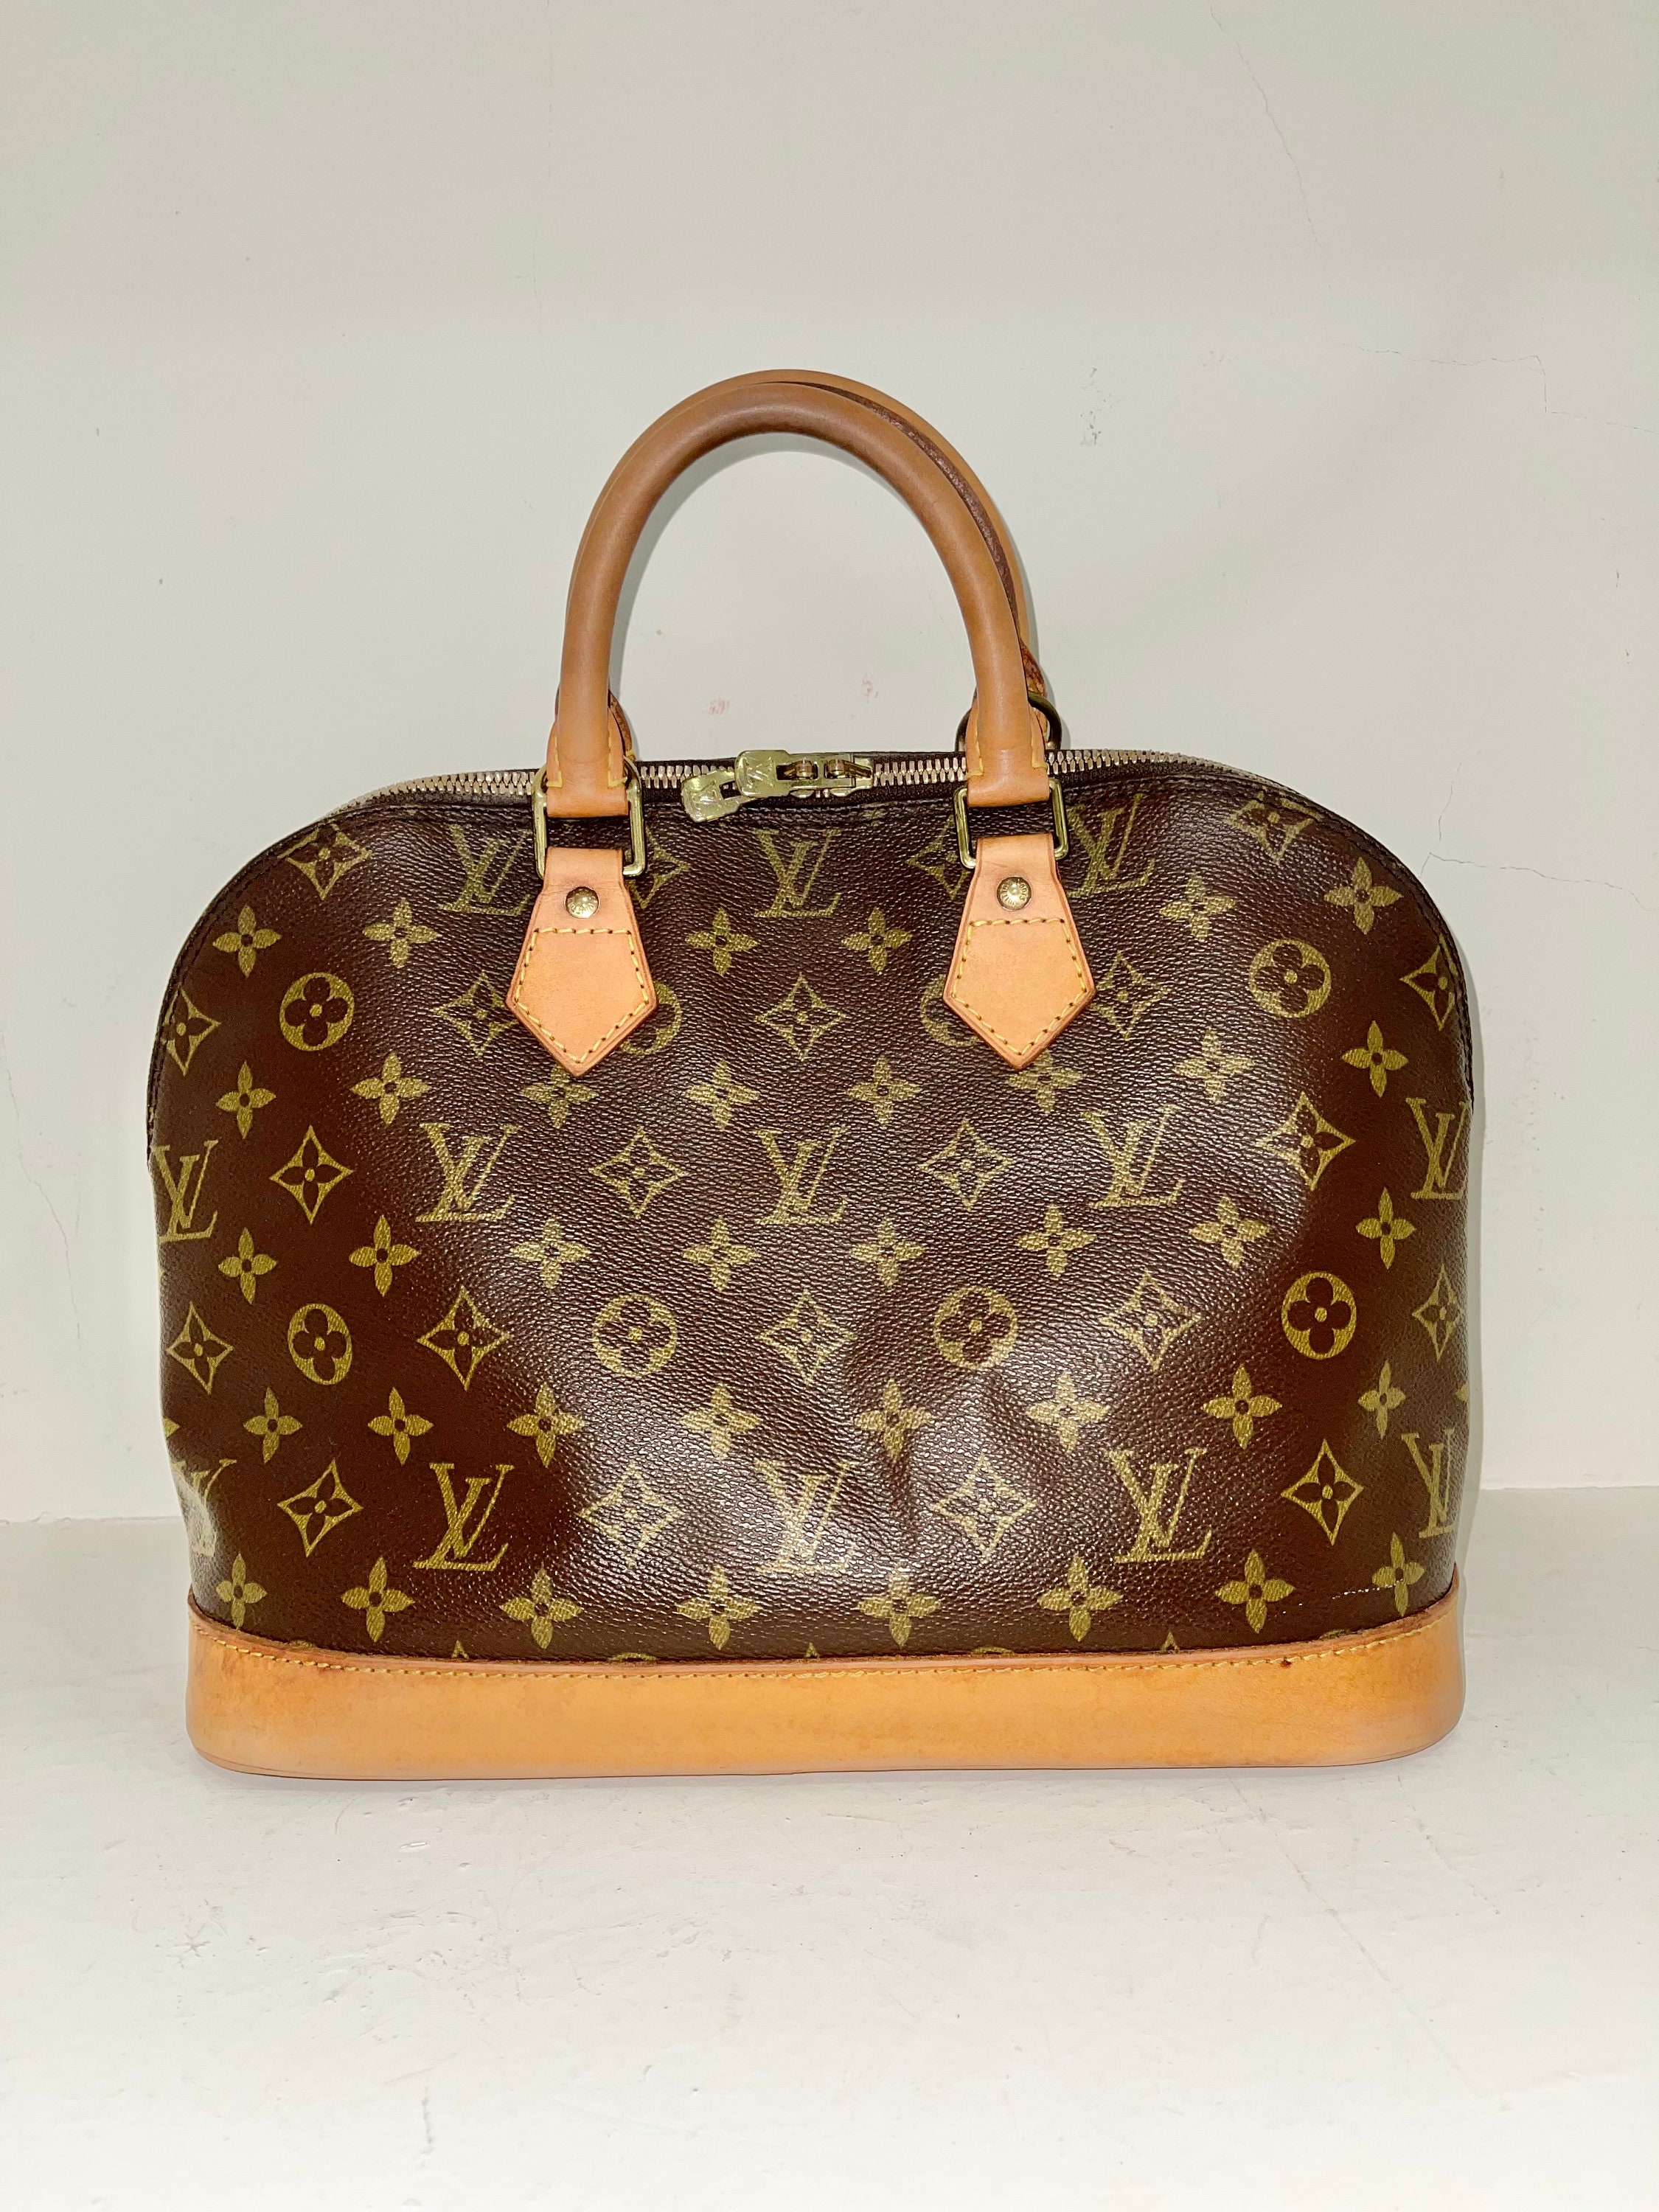 Everyday Louis V. Bag replica with strap - clothing & accessories